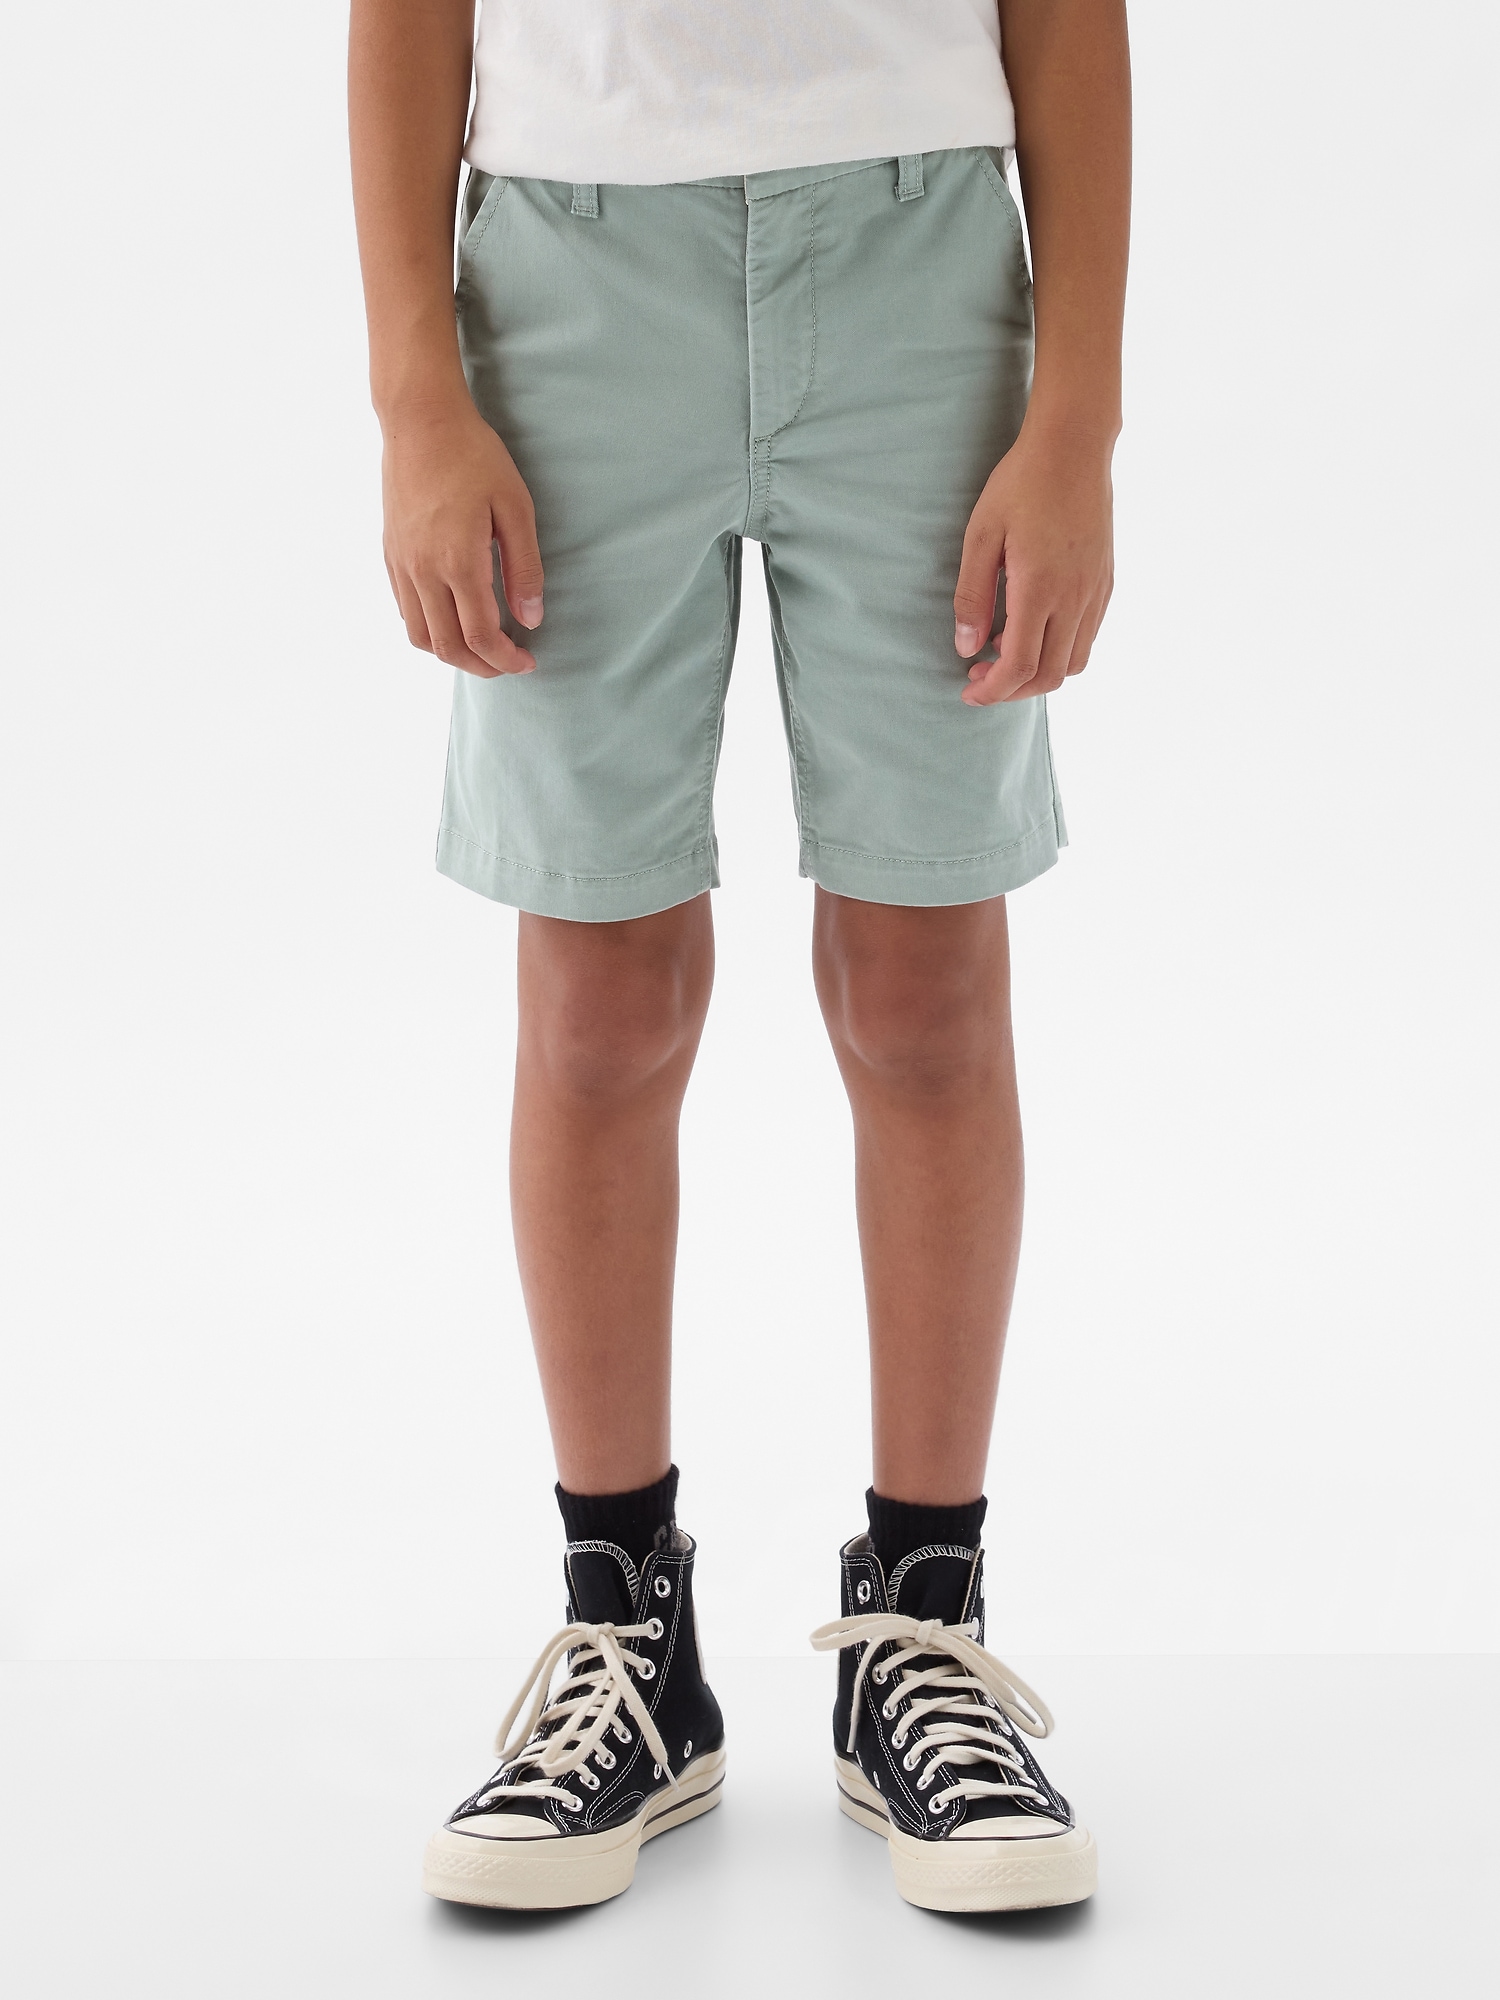 clothing Kids accessories footwear-accessories Shorts